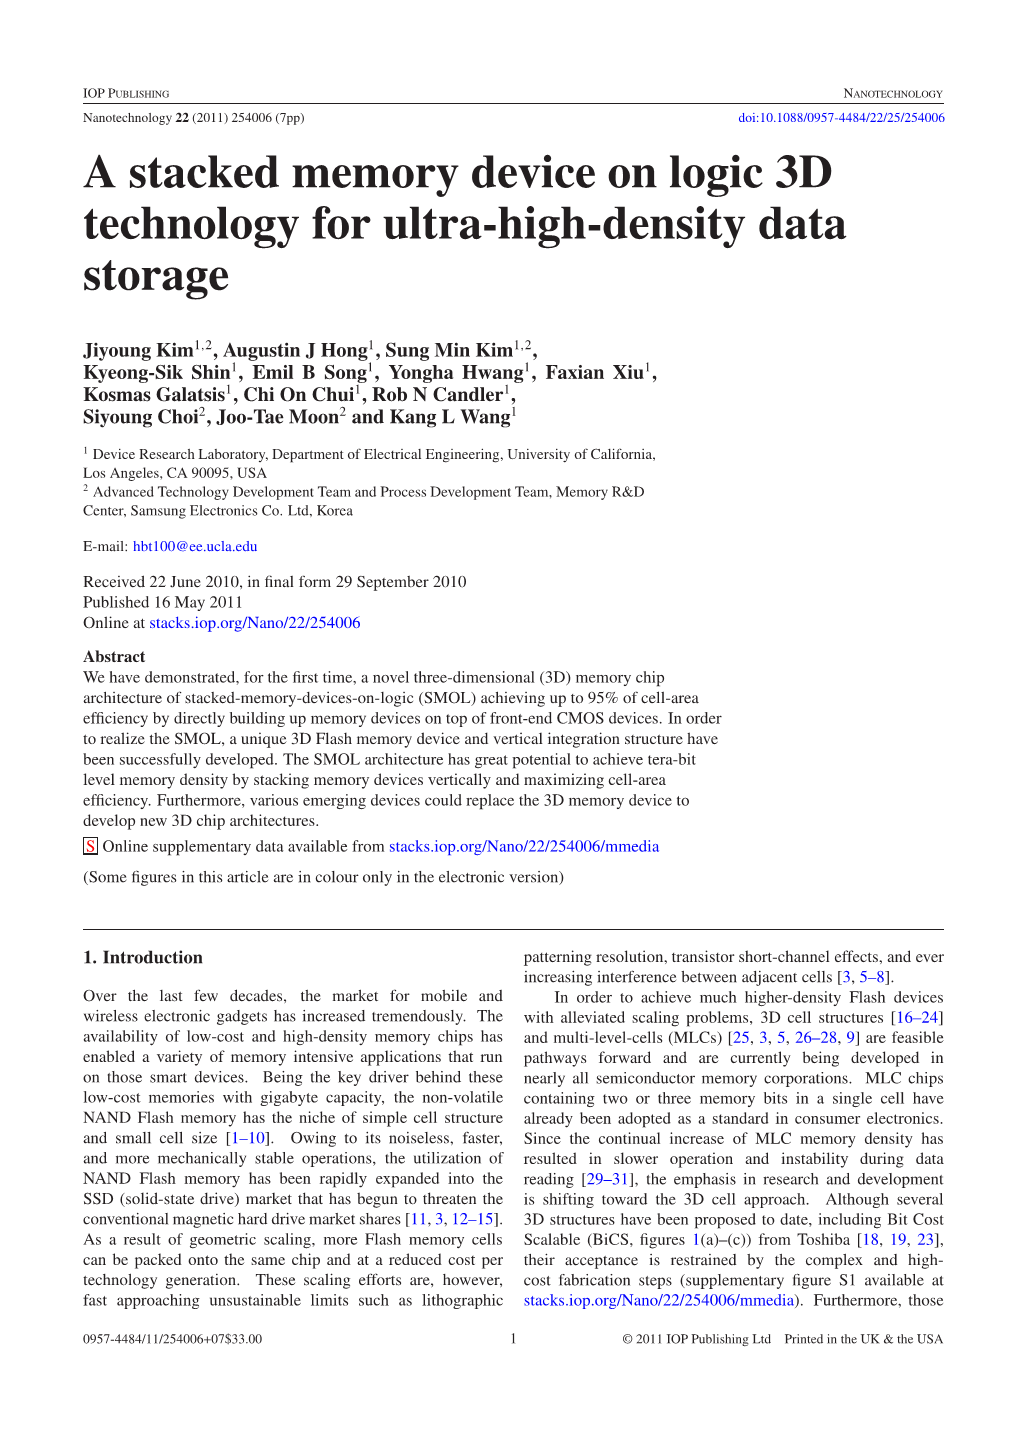 A Stacked Memory Device on Logic 3D Technology for Ultra-High-Density Data Storage